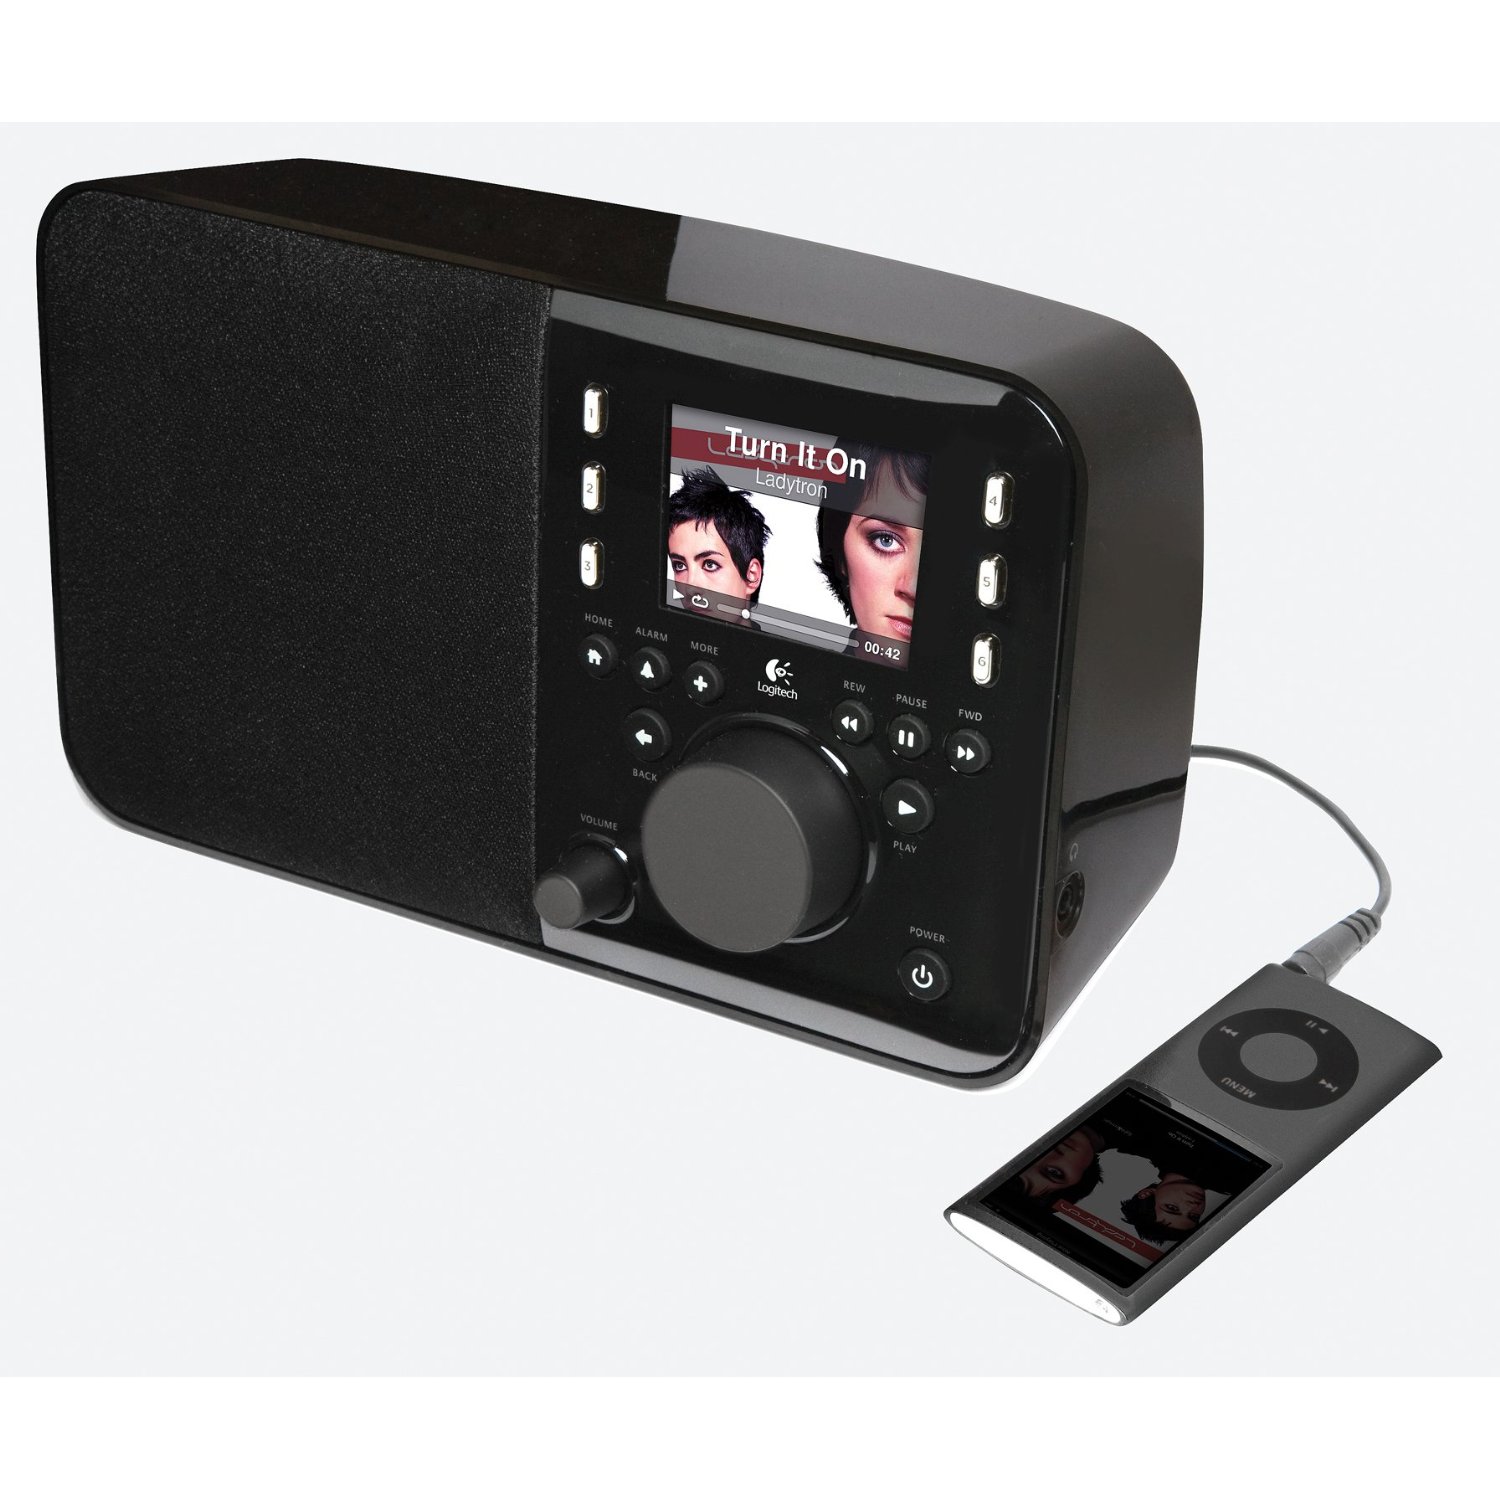 http://thetechjournal.com/wp-content/uploads/images/1108/1314346288-logitech-squeezebox-radio-music-player-with-color-screen-20.jpg